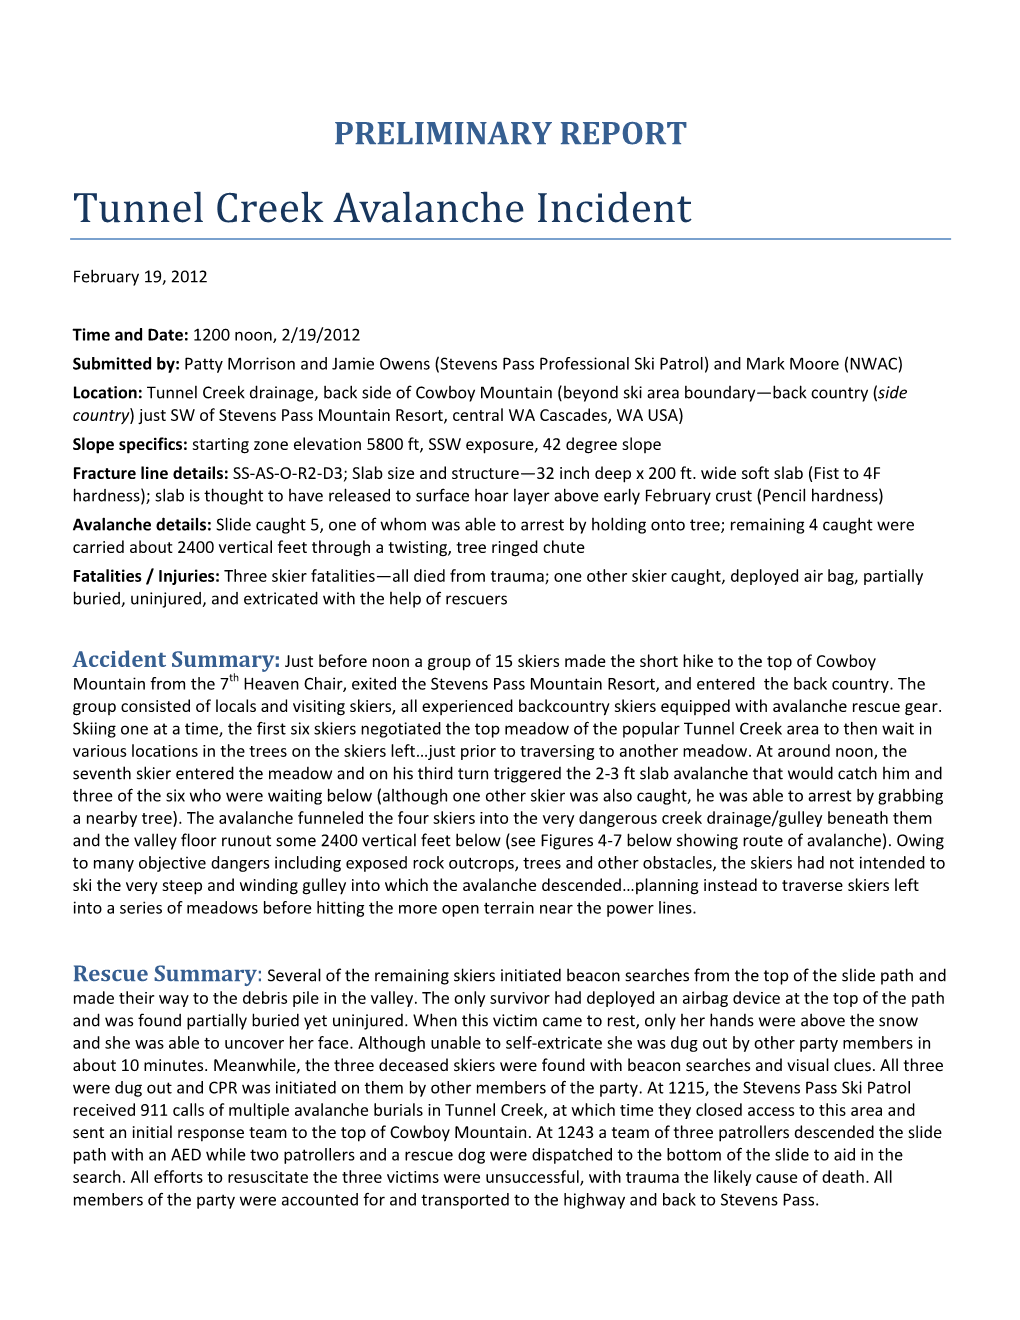 Tunnel Creek Avalanche Incident